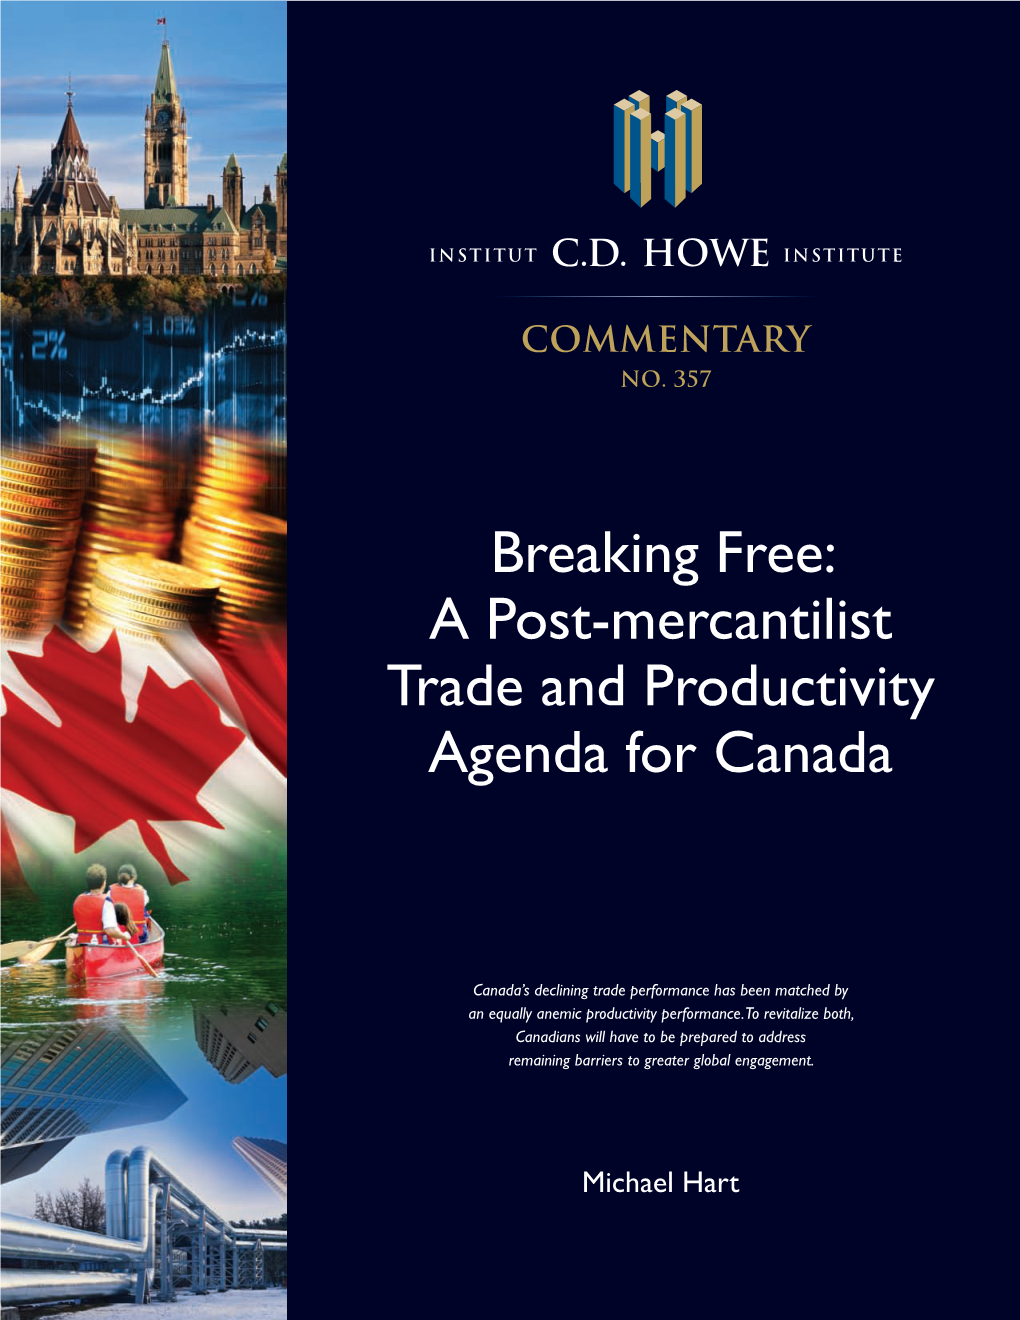 A Post-Mercantilist Trade and Productivity Agenda for Canada